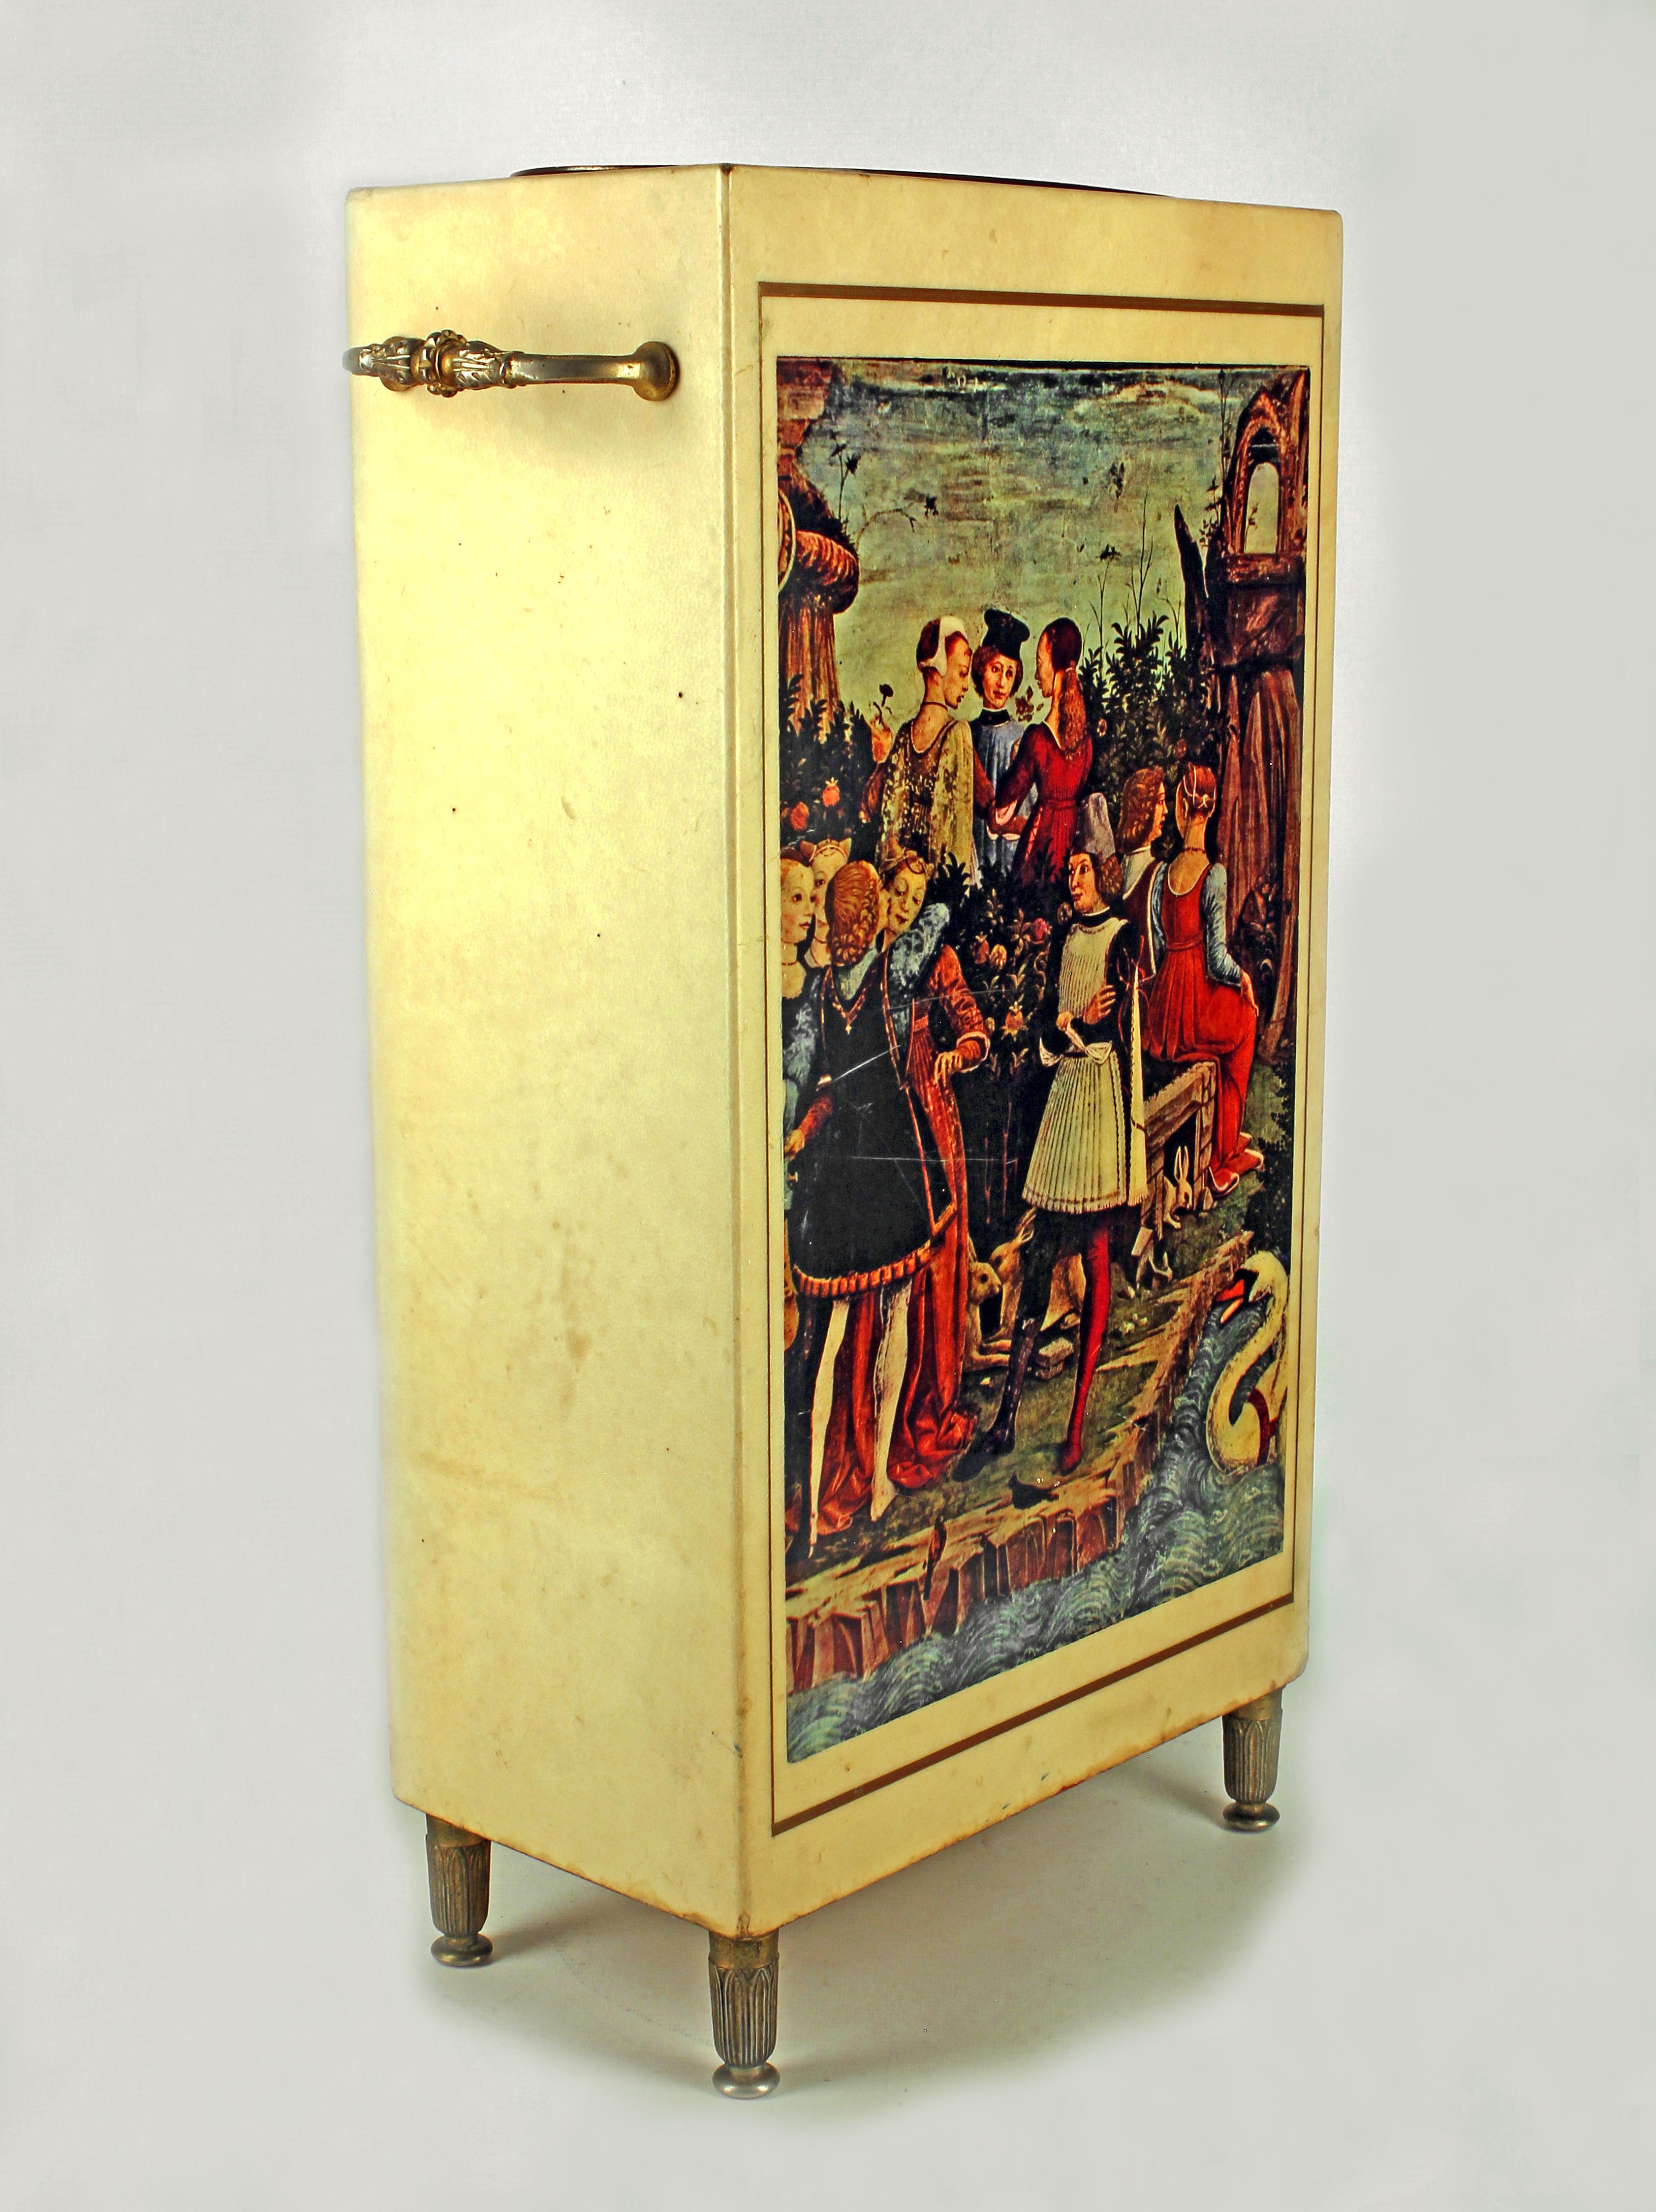 Late 20th century brass umbrella stand covered in lacquered goatskin by italian designer Aldo Tura

By: Aldo Tura
Material: brass, copper, goatskin, paint, parchment paper, zinc, metal
Technique: cast, hand-painted, lacquered, painted
Dimensions: 6